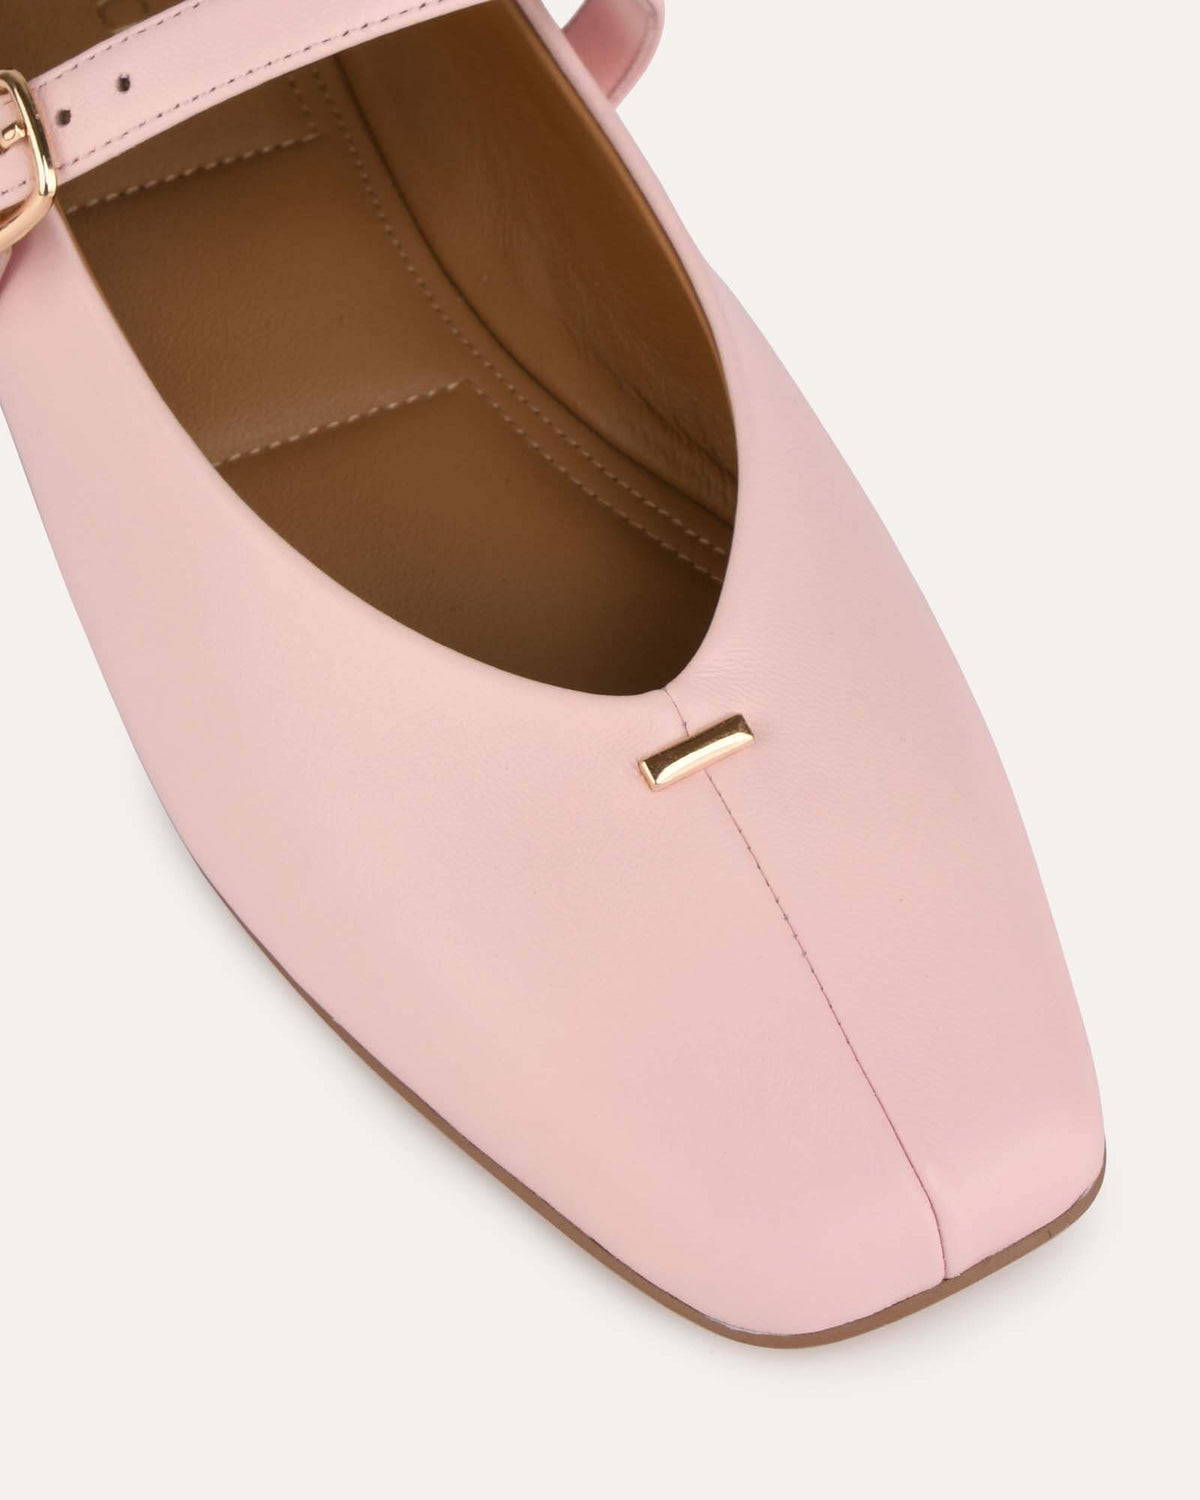 APRIL CASUAL FLATS SOFT PINK LEATHER